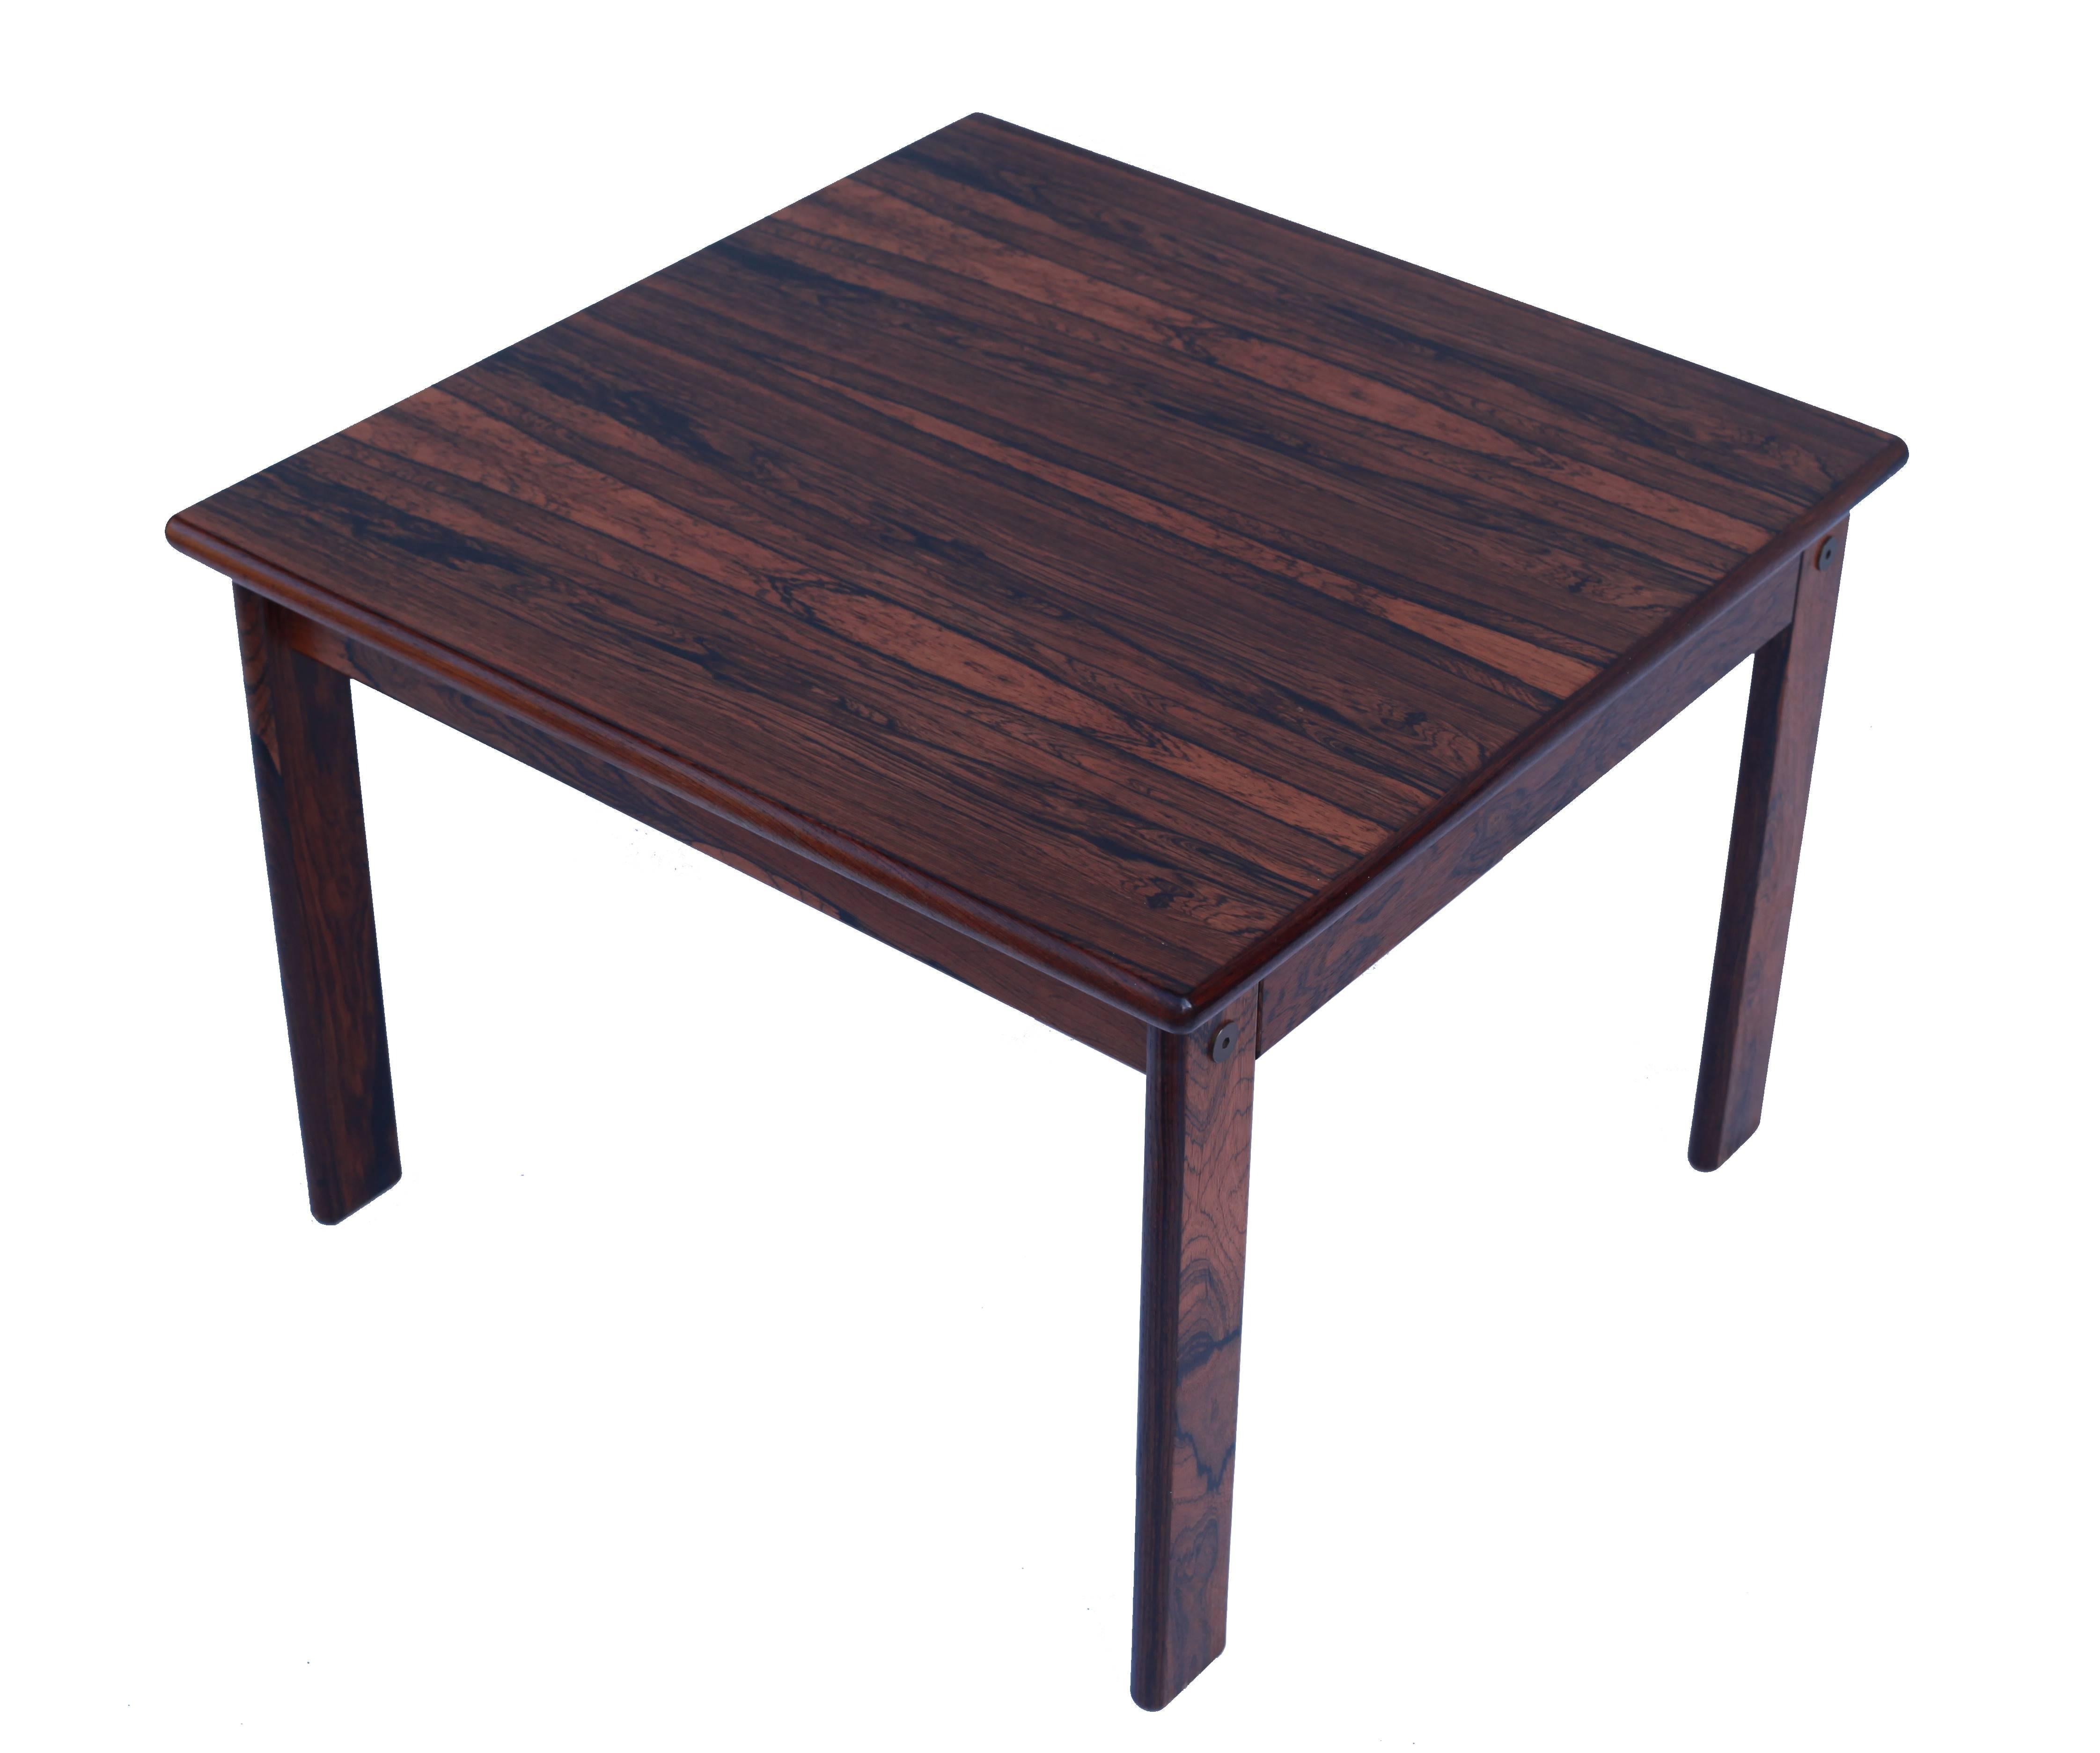 This stunning palisander table crafted in Finland can be used as a side table or possibly a coffee table.